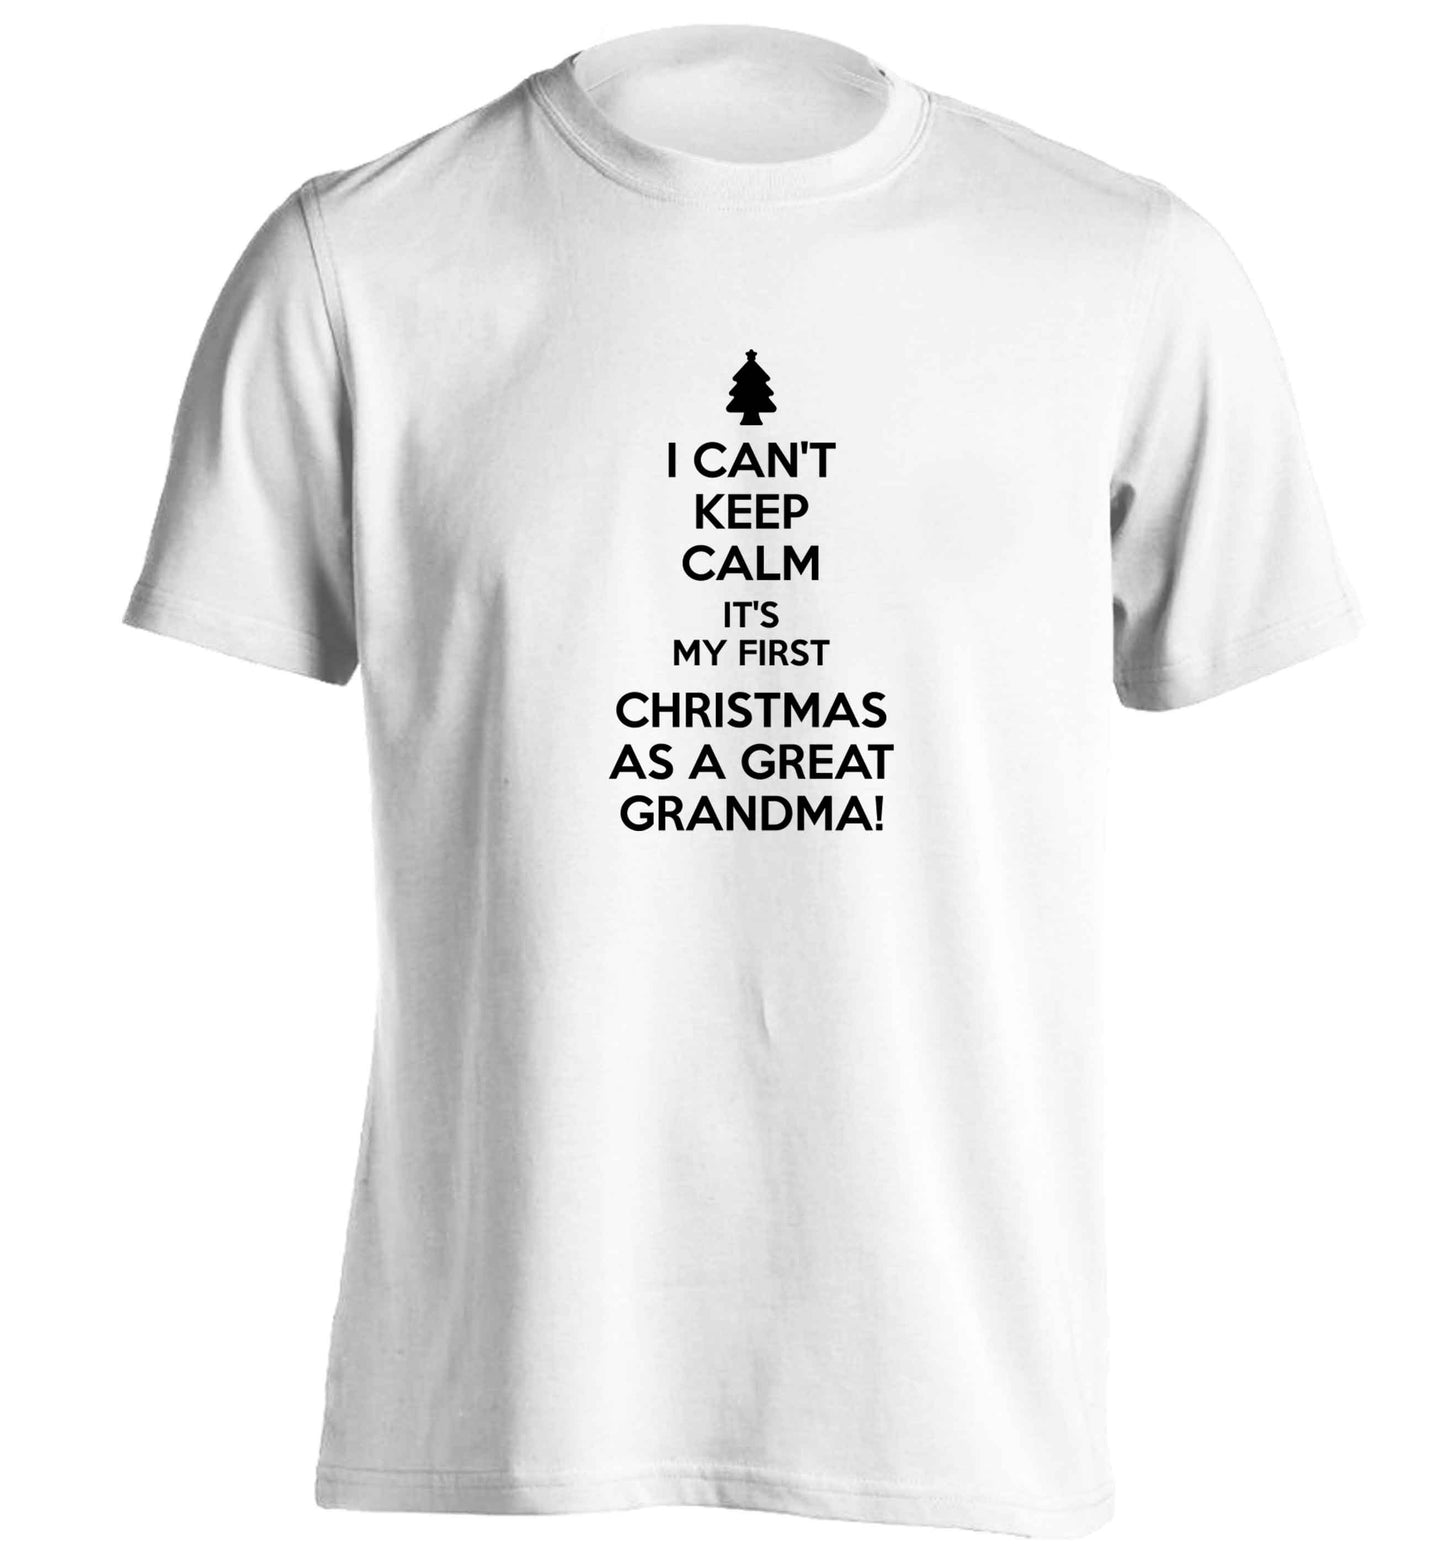 I can't keep calm it's my first Christmas as a great grandma! adults unisex white Tshirt 2XL